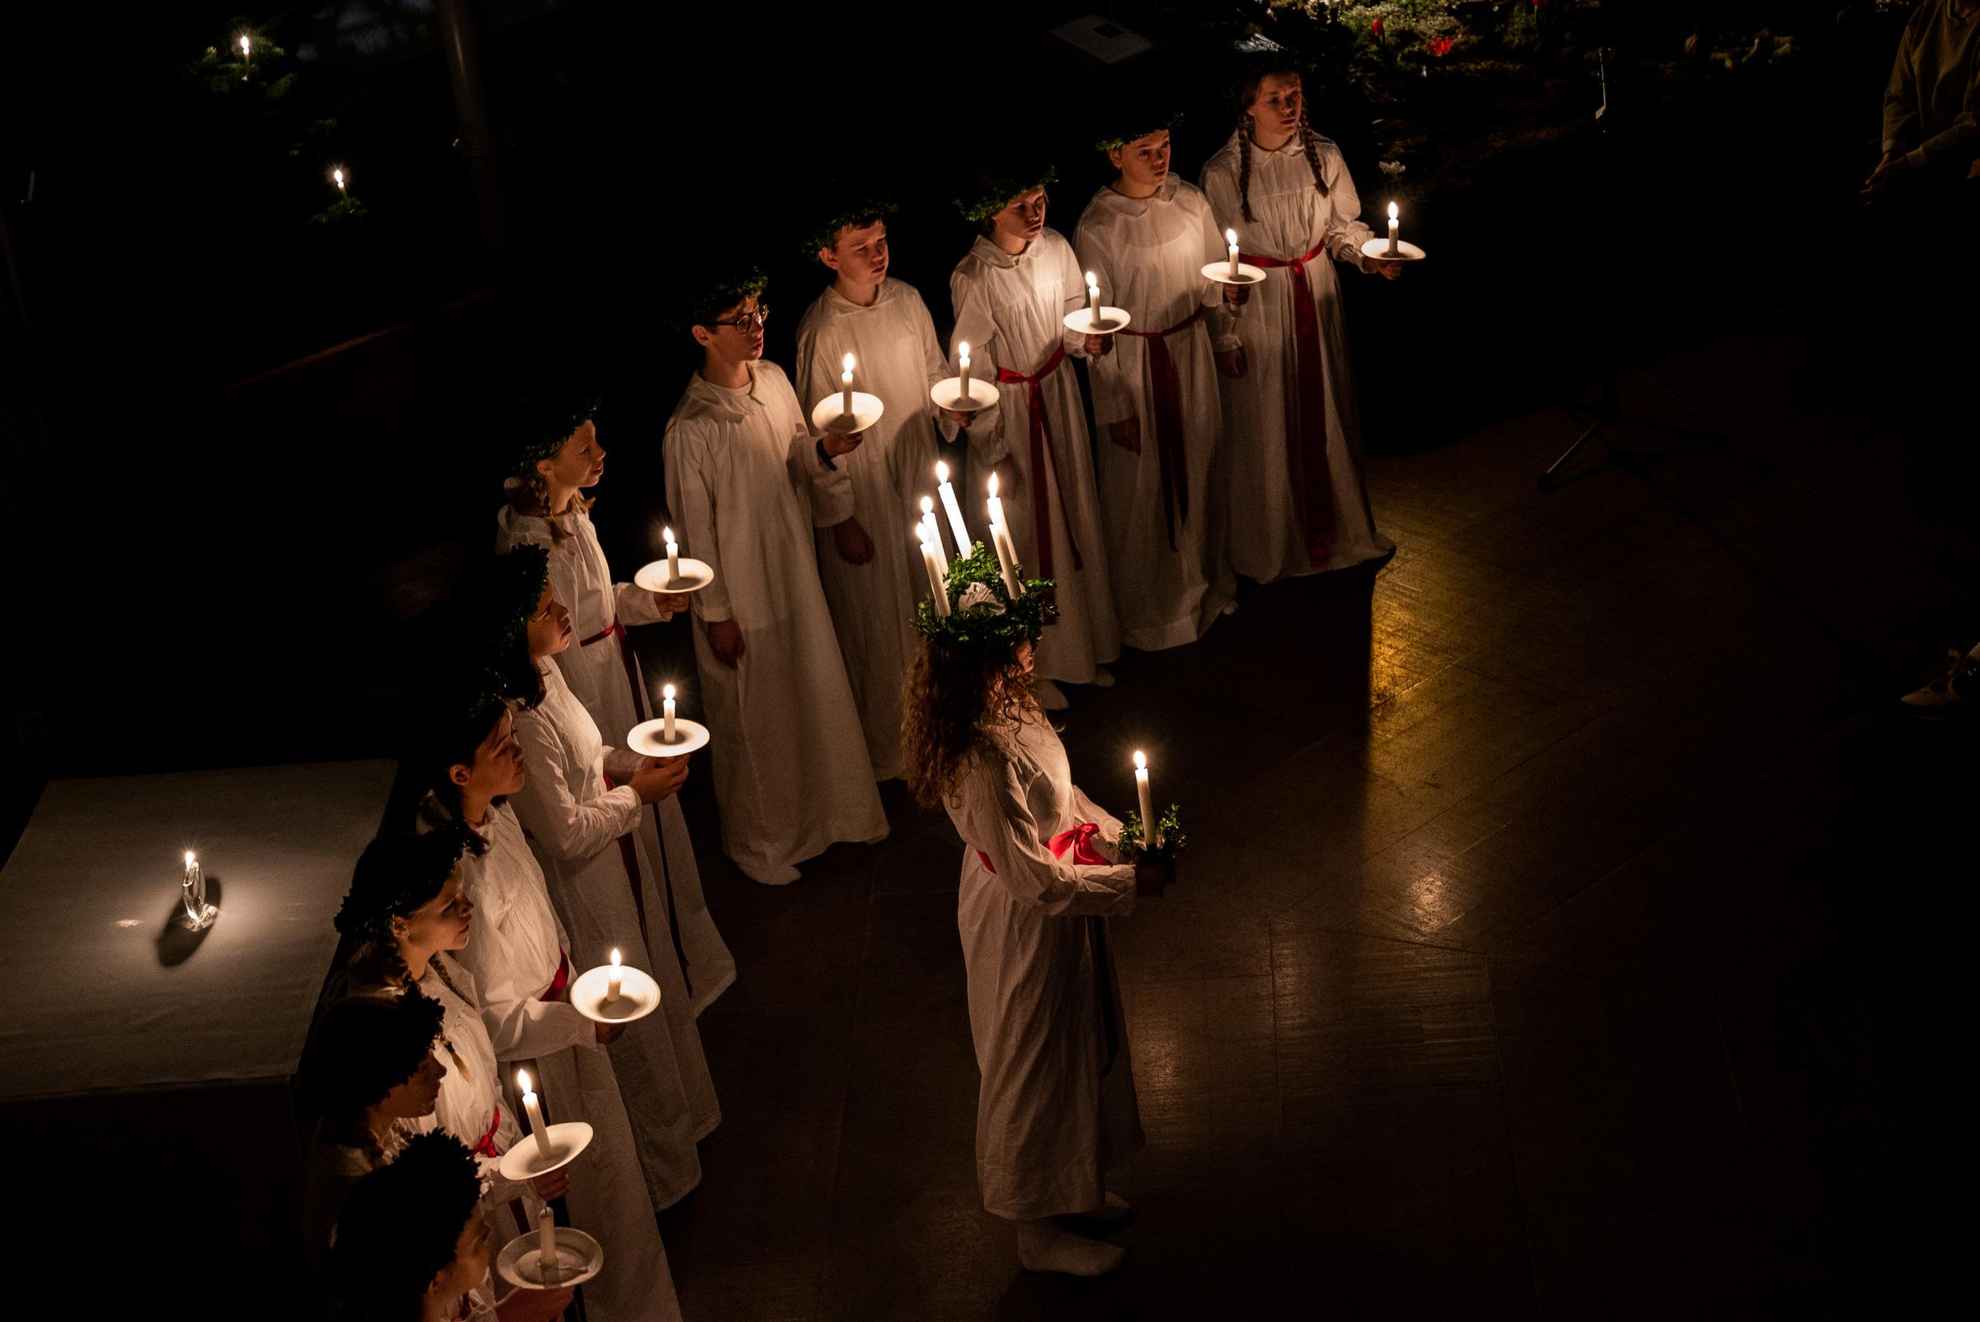 A Lucia with candles in her hair seen from the side and behind her several handmaidens all carrying a candle in the hand and dressed in white gowns.